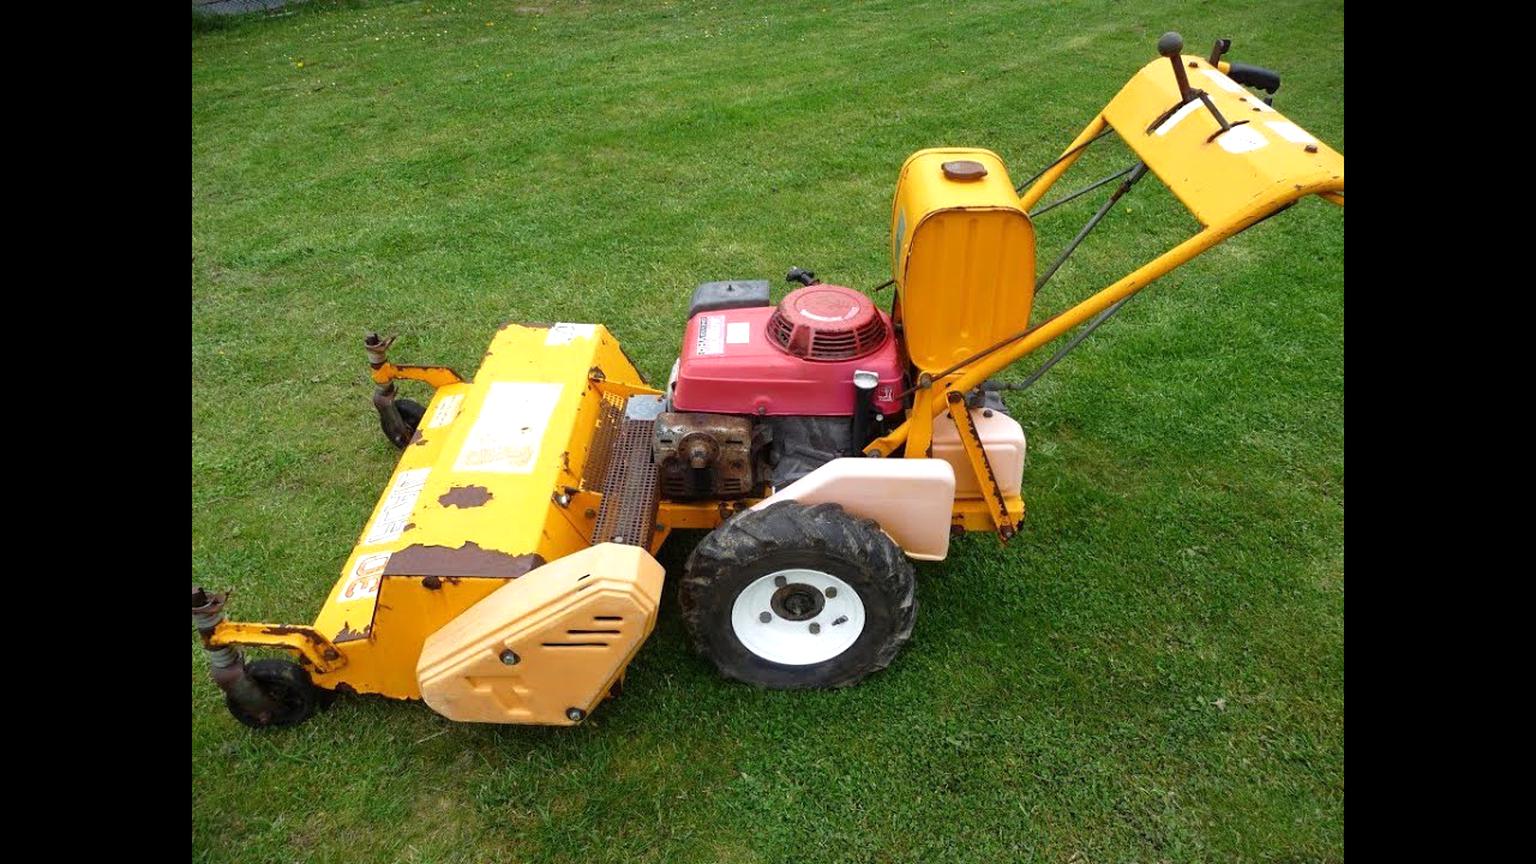 Turner Flail Mower for sale in UK | 18 used Turner Flail Mowers